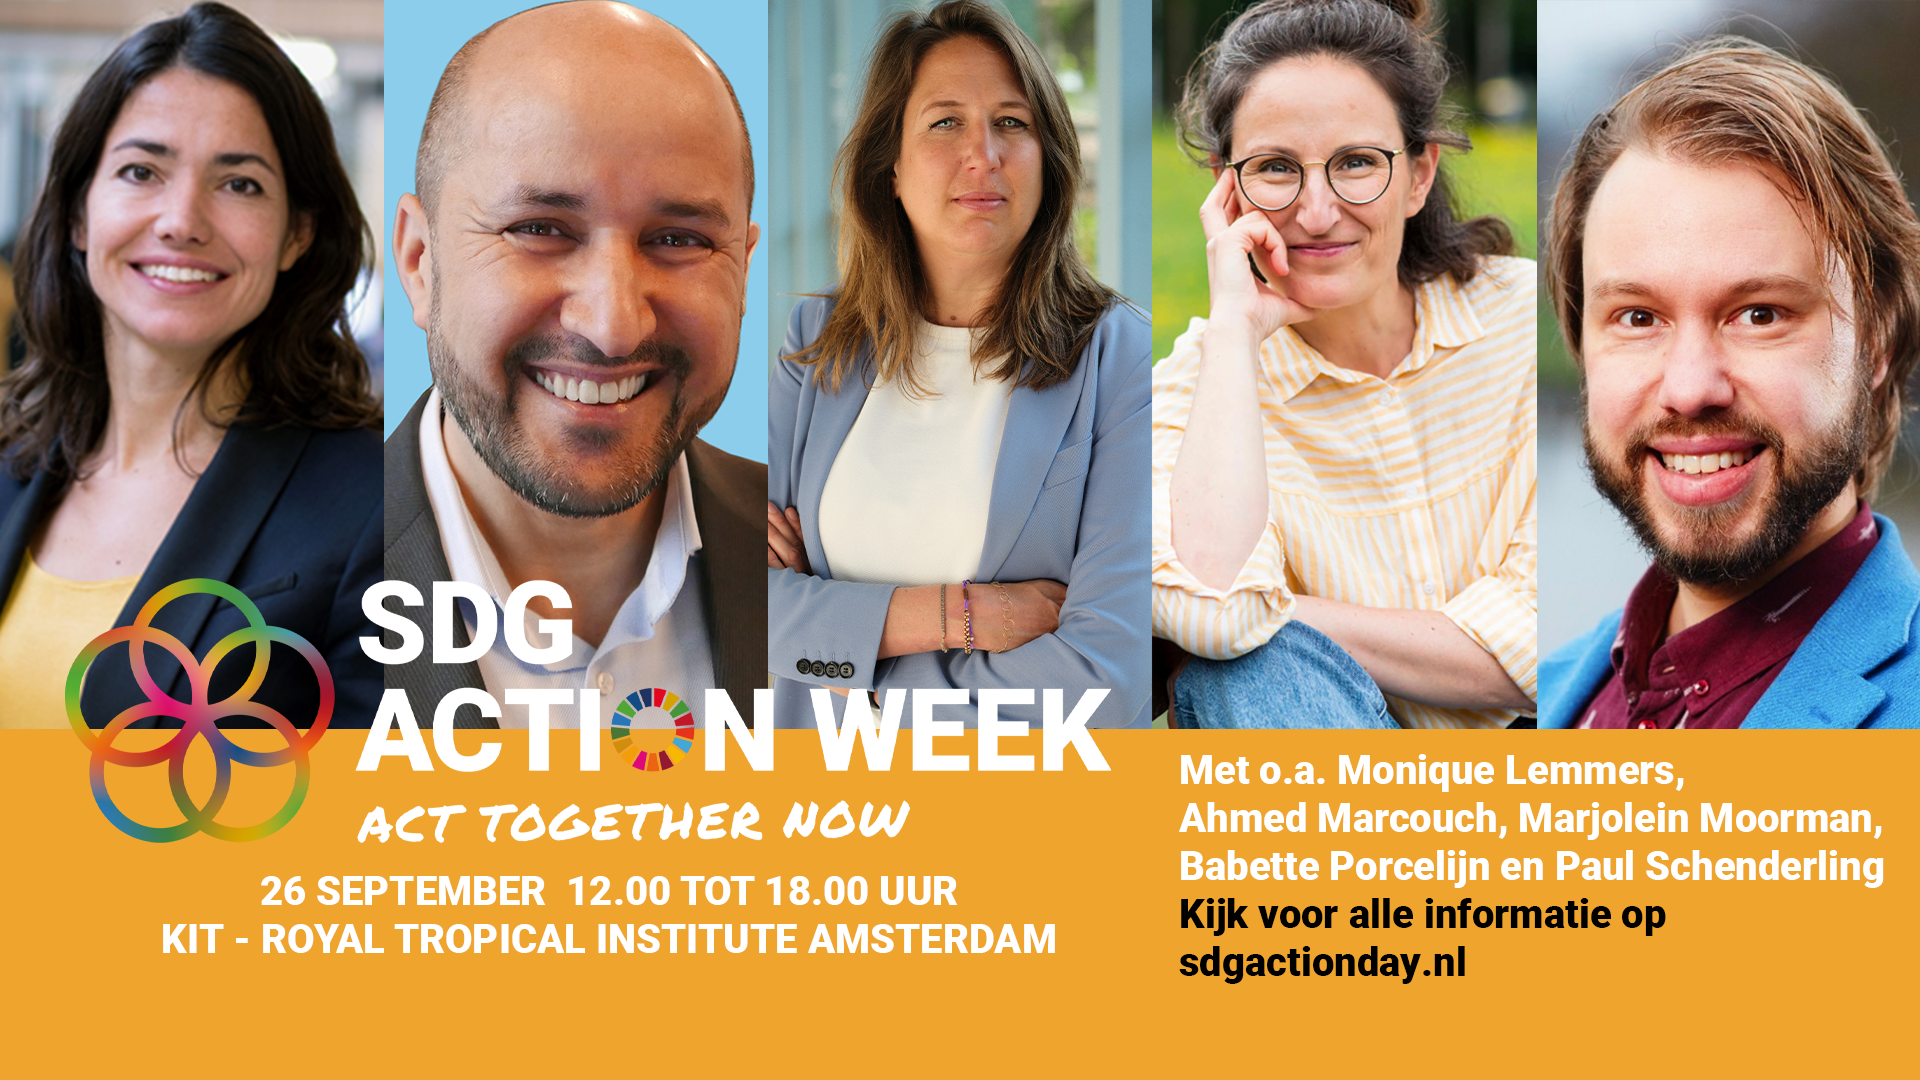 SDG Action Day - ACT TOGETHER NOW